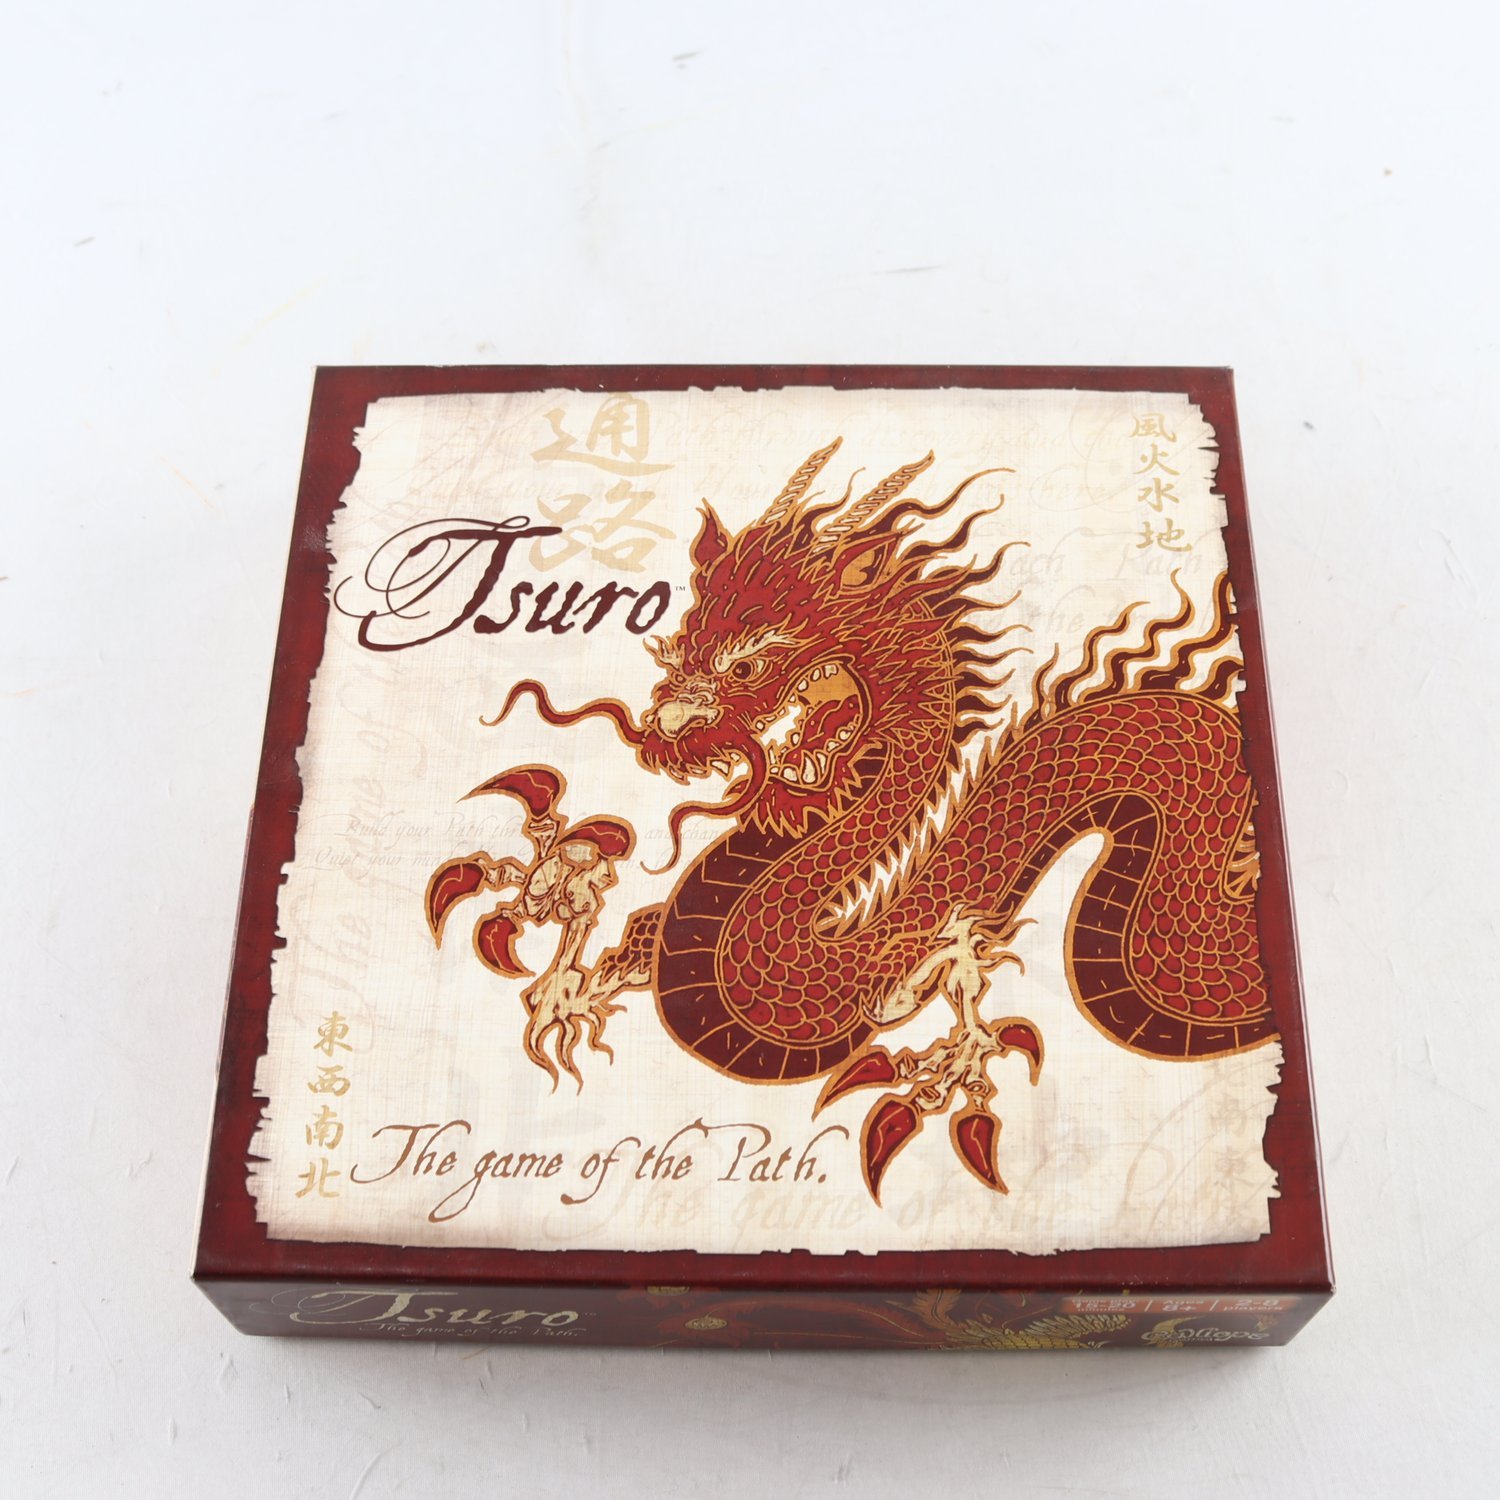 Spel, Tsuro, the game of the path.